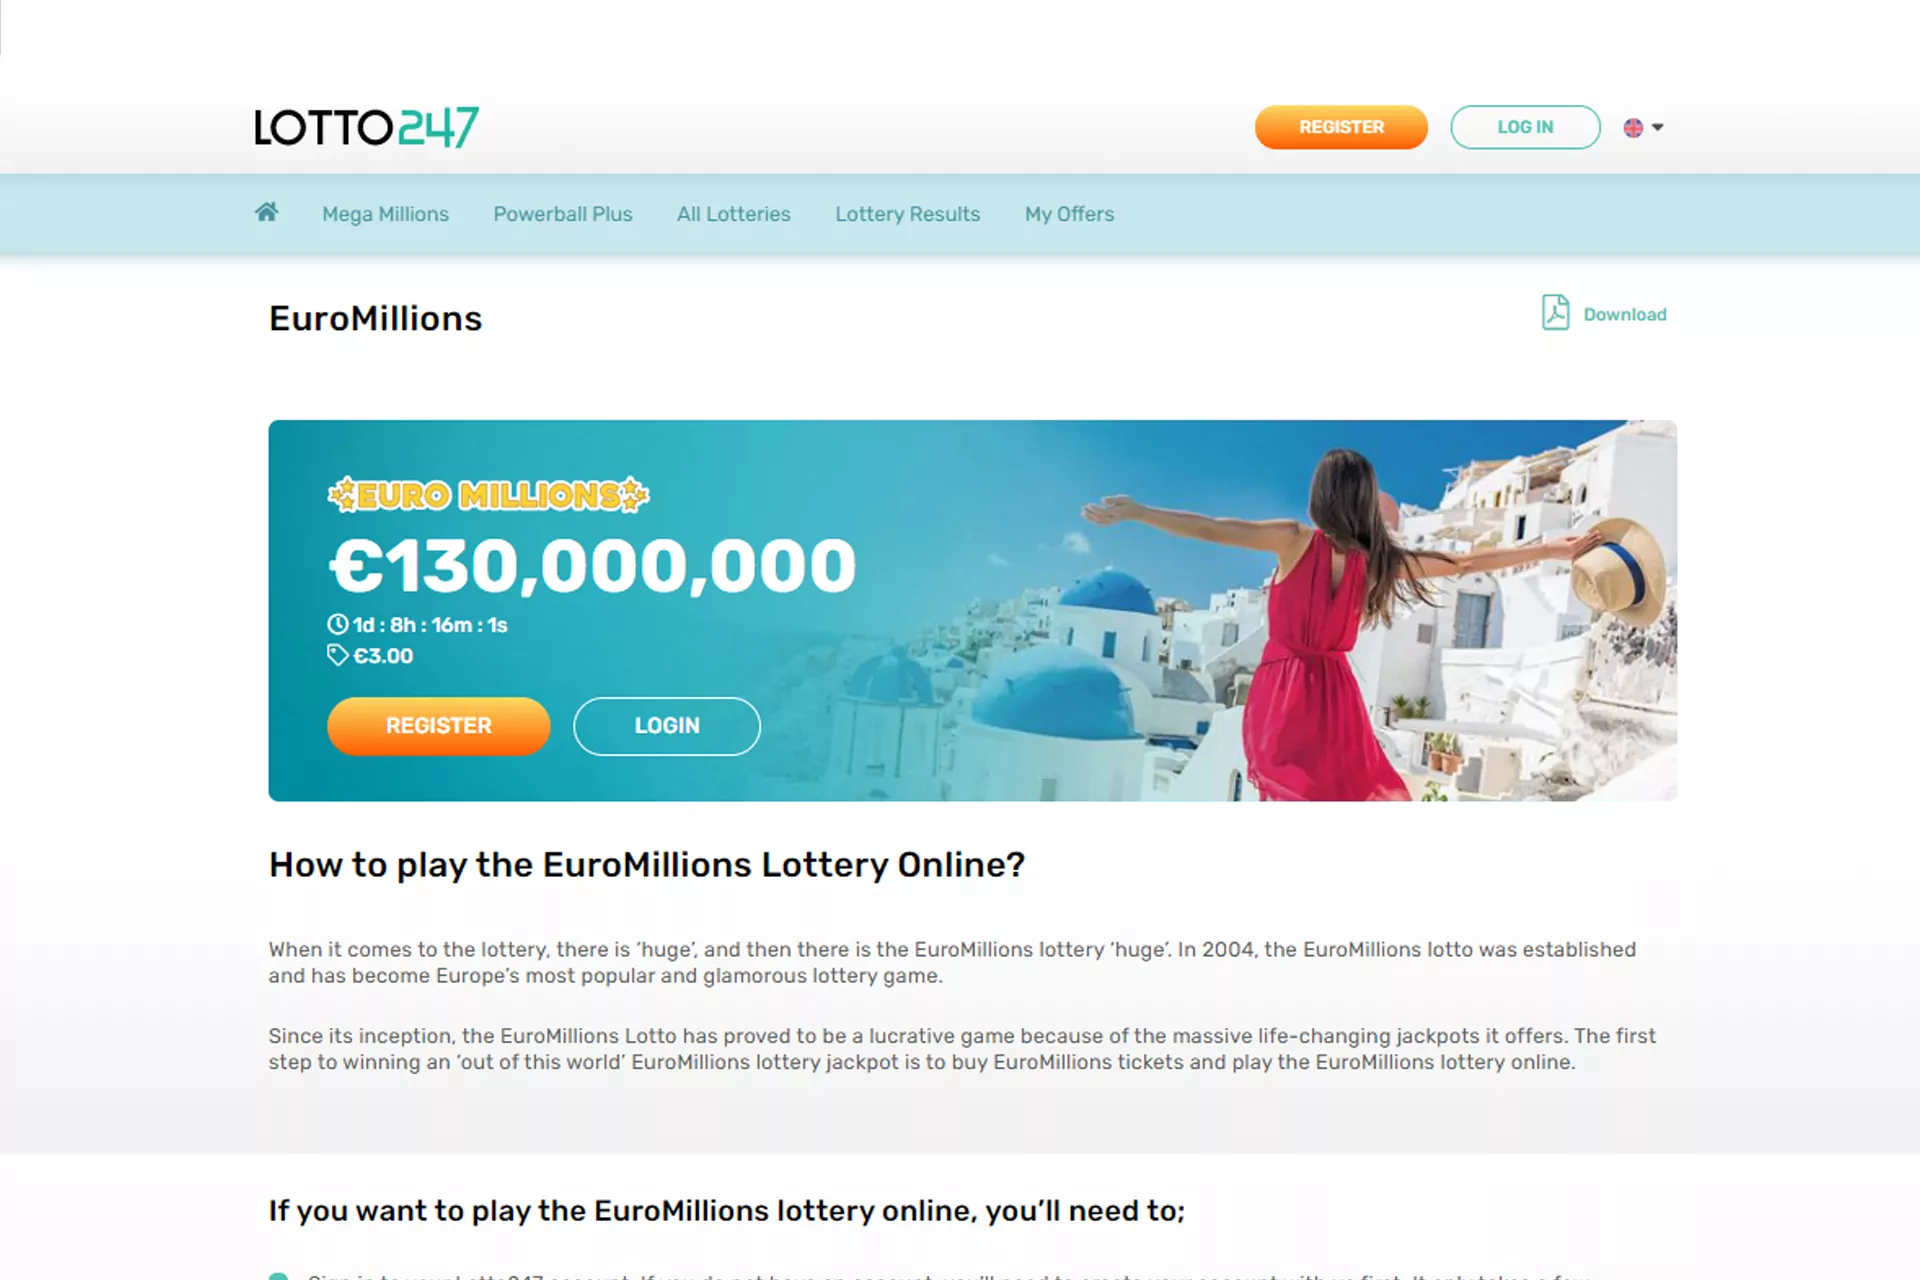 EuroMillions is a great chance to win a huge award of over 100 million euros.